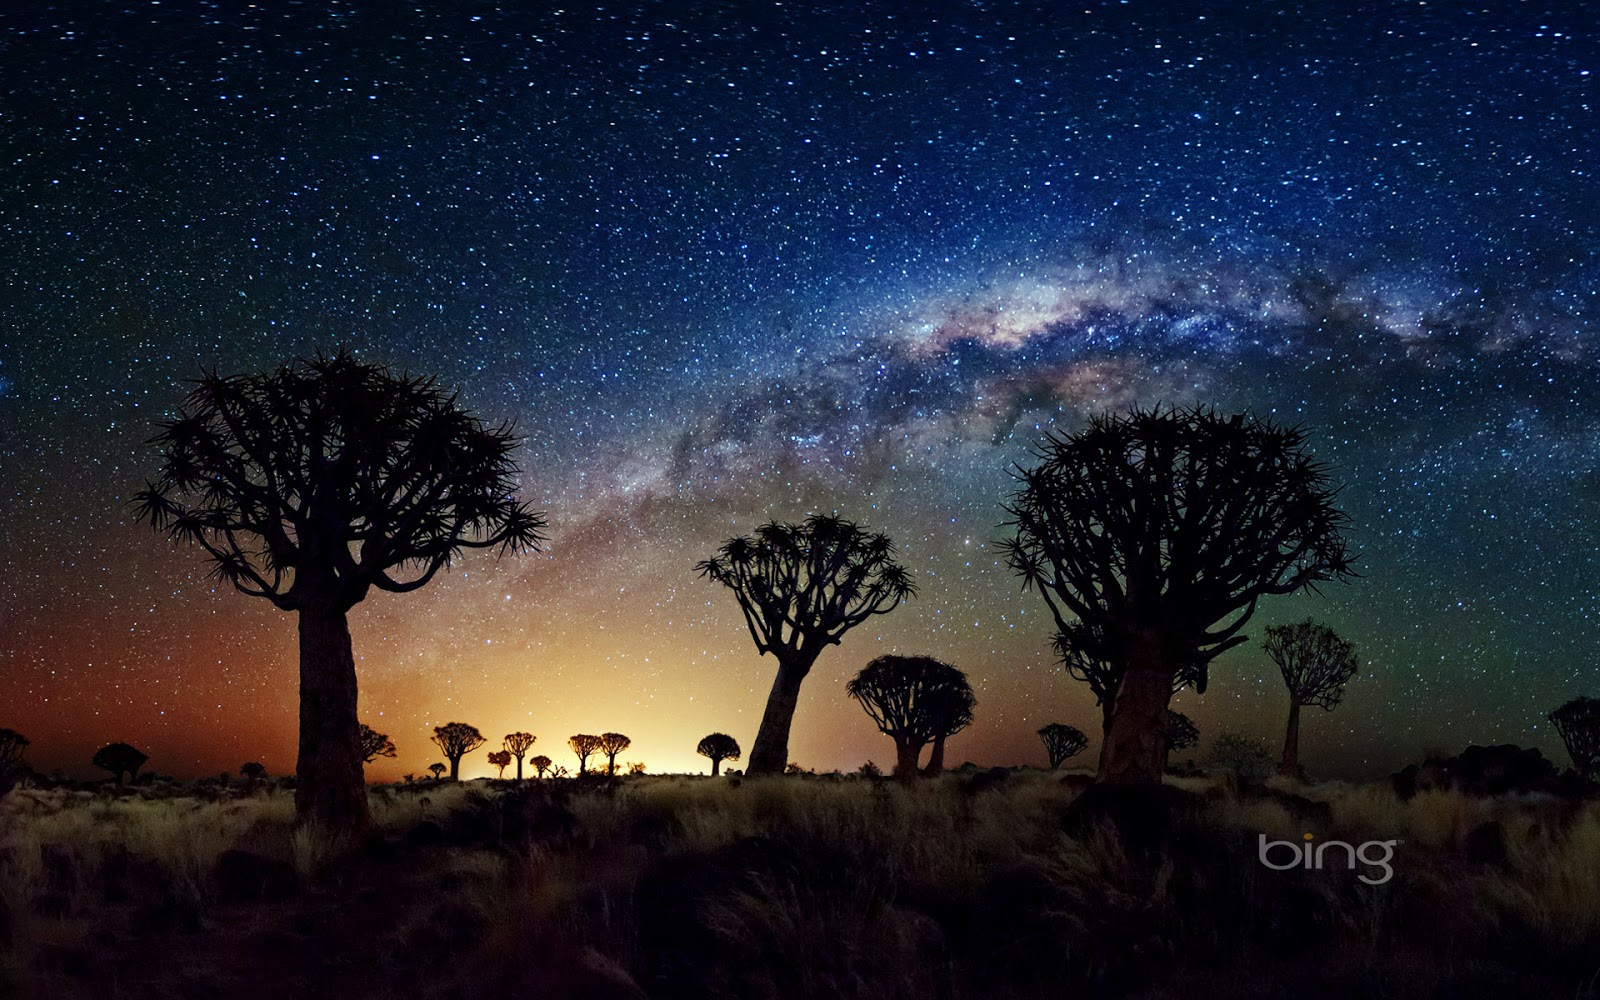 The Milky Way stretches over the Quiver Tree Forest Namibia